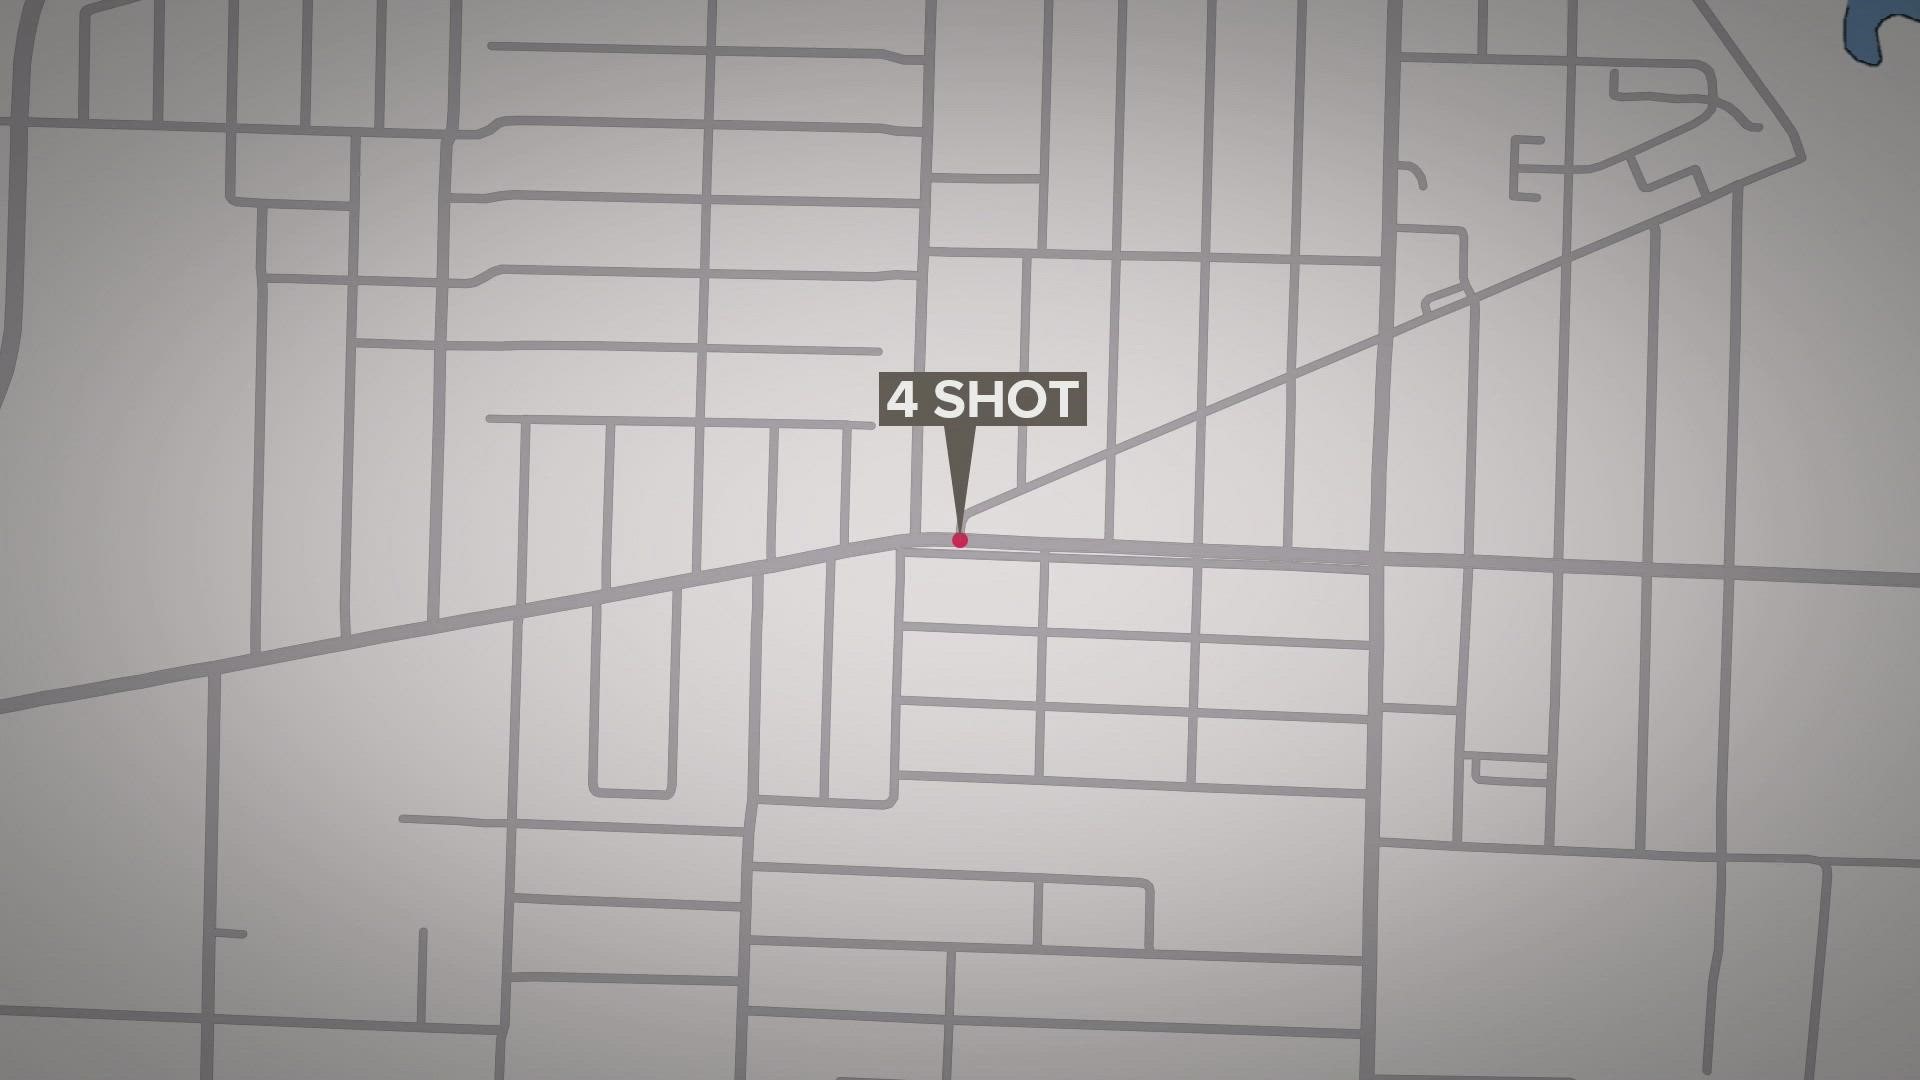 Just after 11 p.m. a shooting took place at Peres Avenue and Chelsea Avenue on May 28.